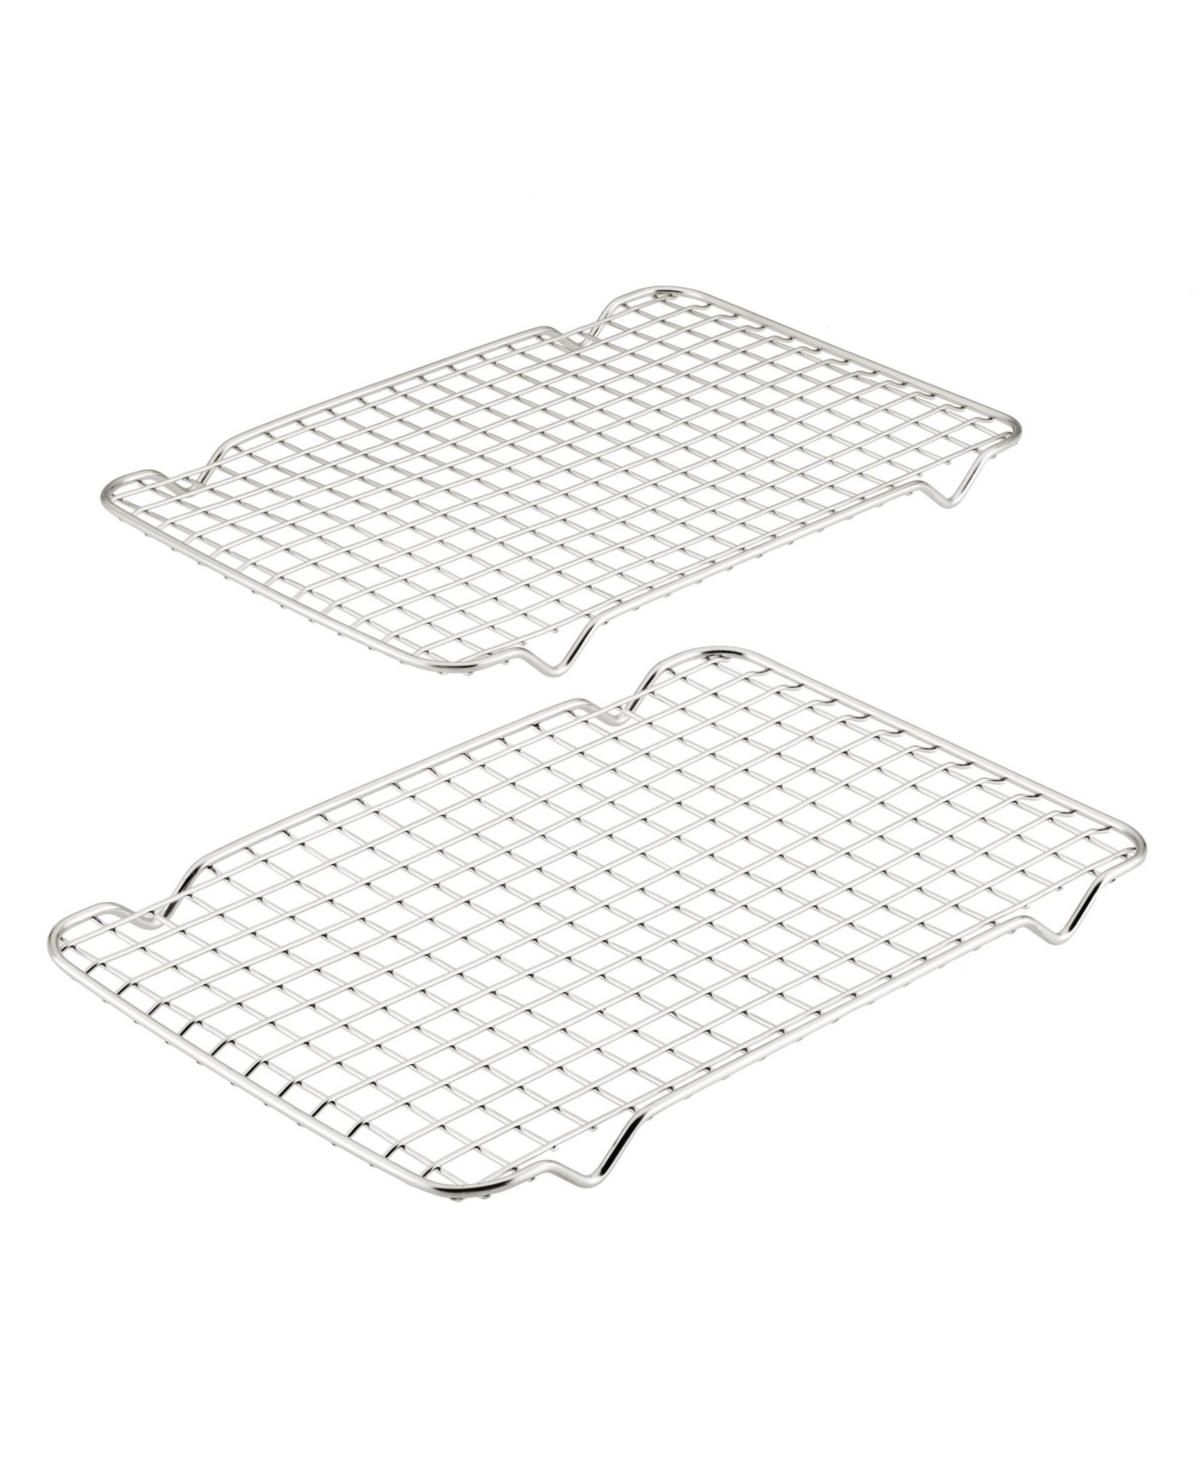 Hestan Provisions Oven Bond Try-plyl Half Sheet Cooling Rack 2-piece Set In Stainless Steel